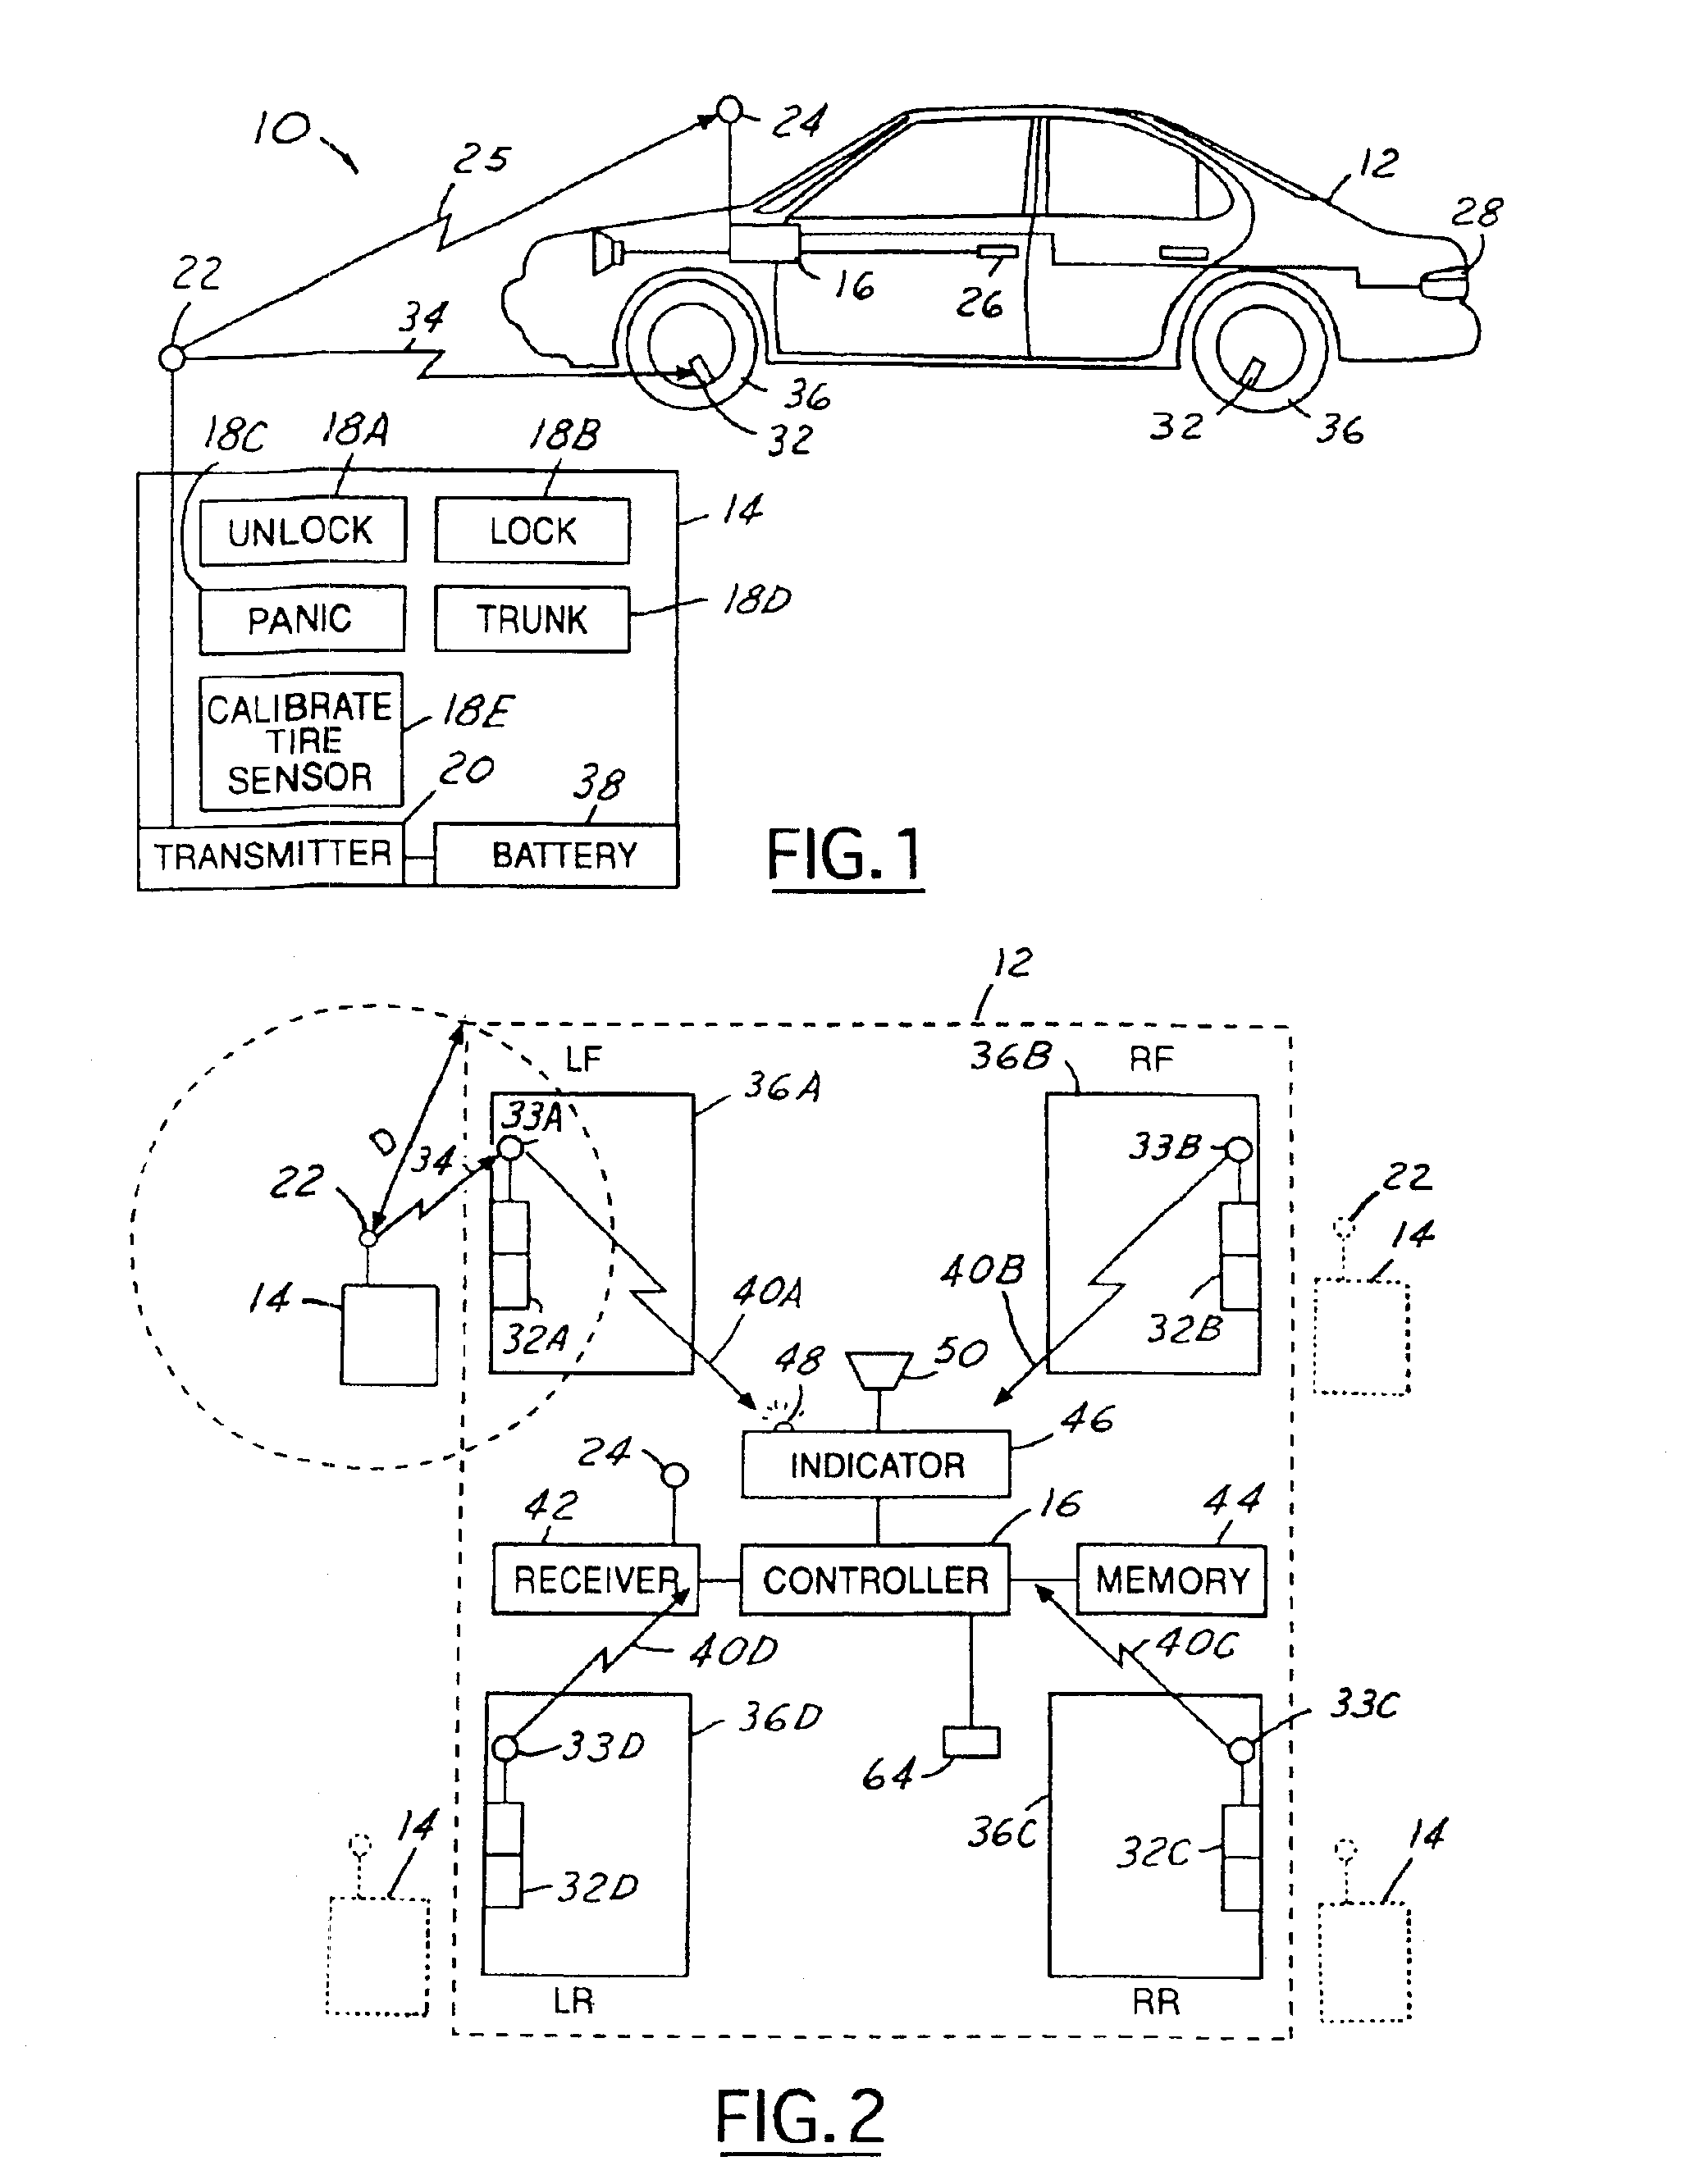 Method and system for calibrating a tire pressure sensing system for an automotive vehicle